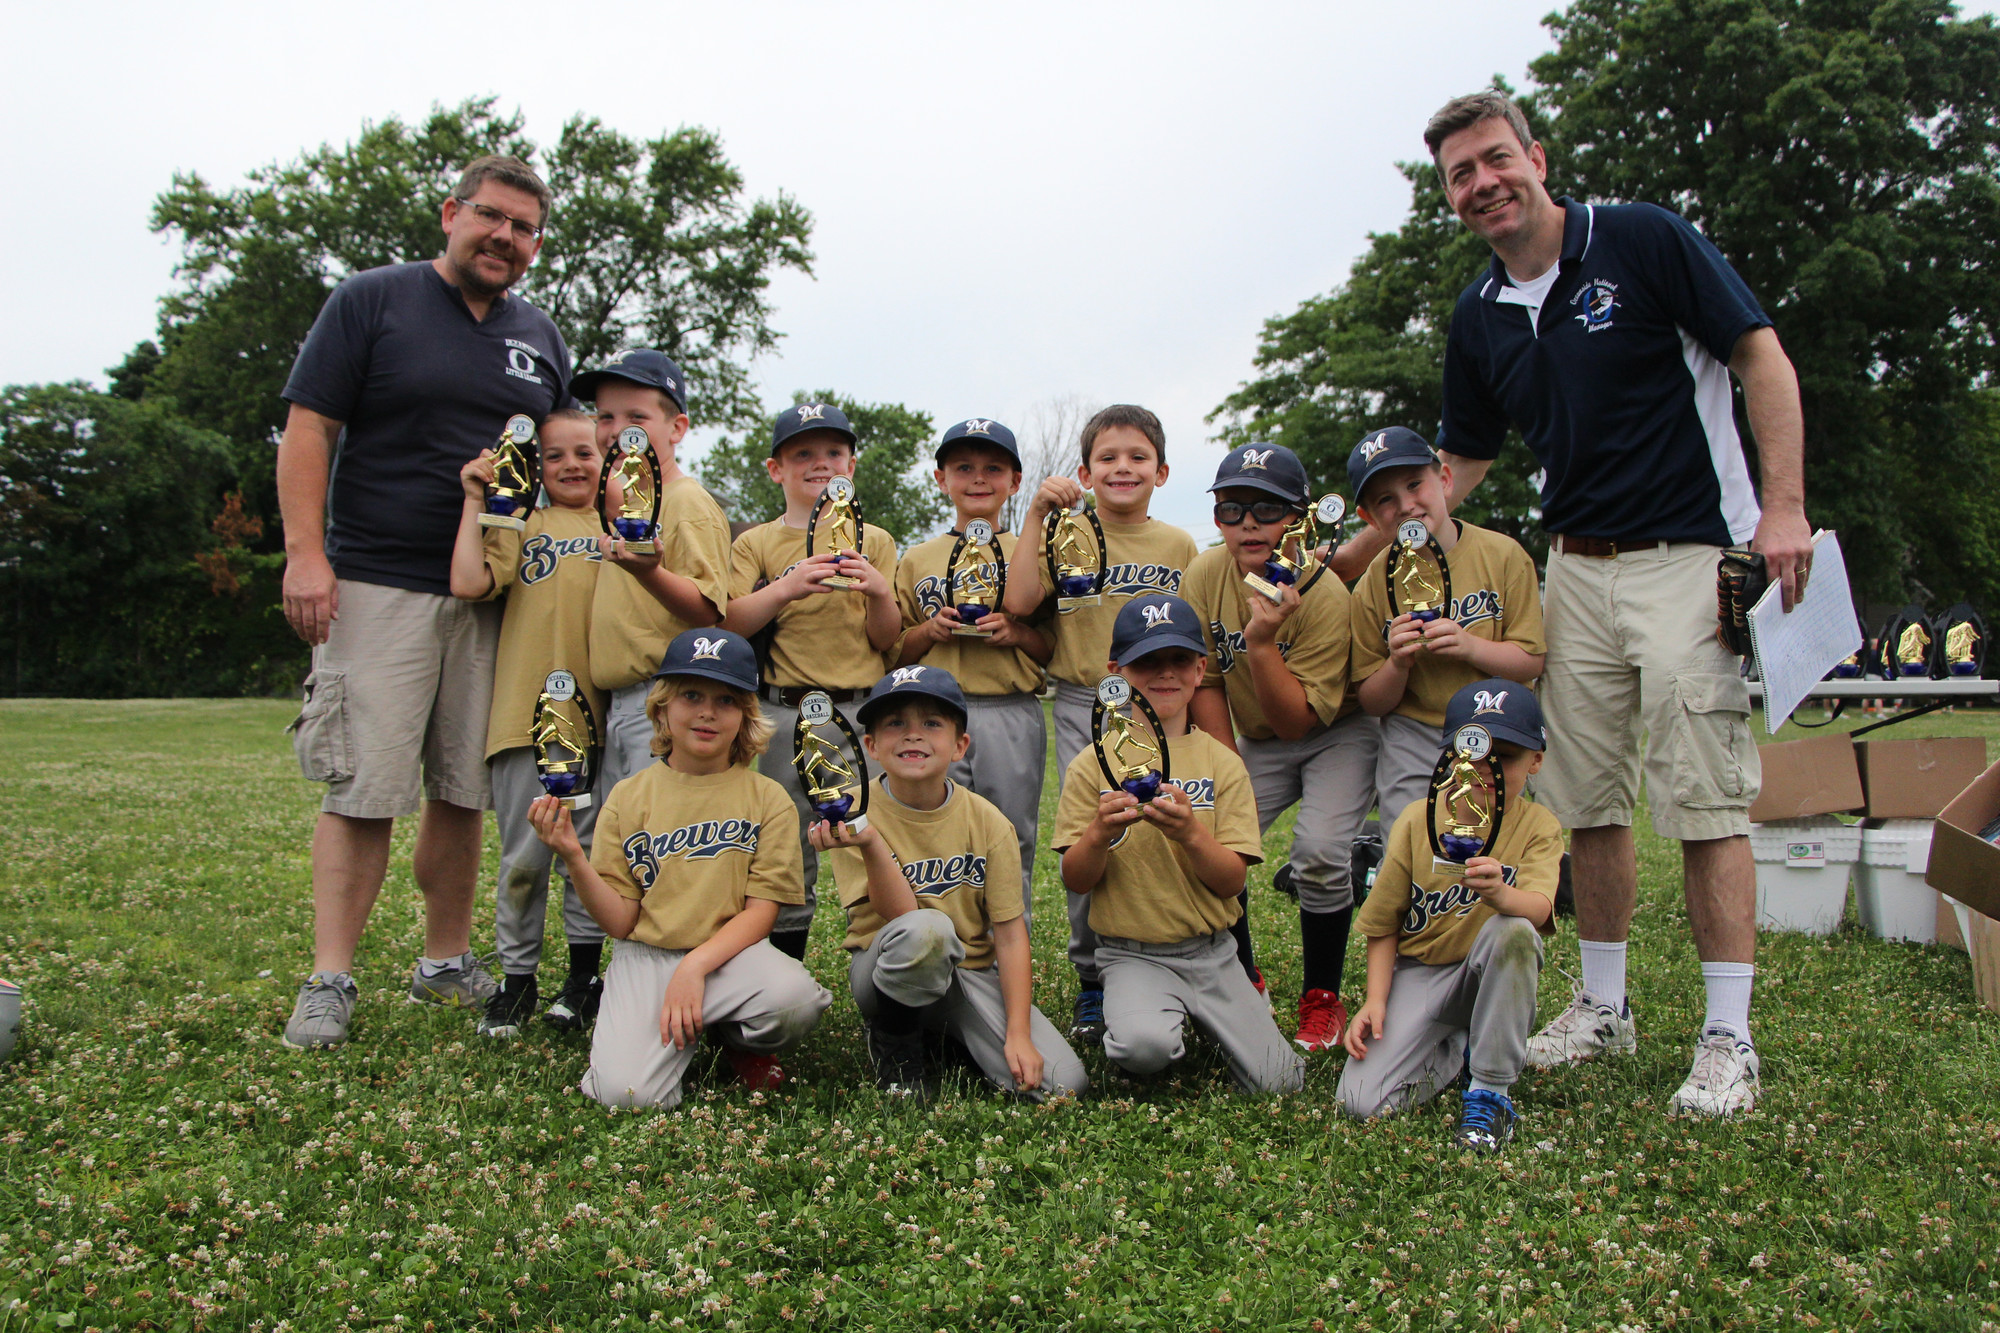 The Brewers little league team received their trophies with their coaches John Henderson and TJ O’Connor.